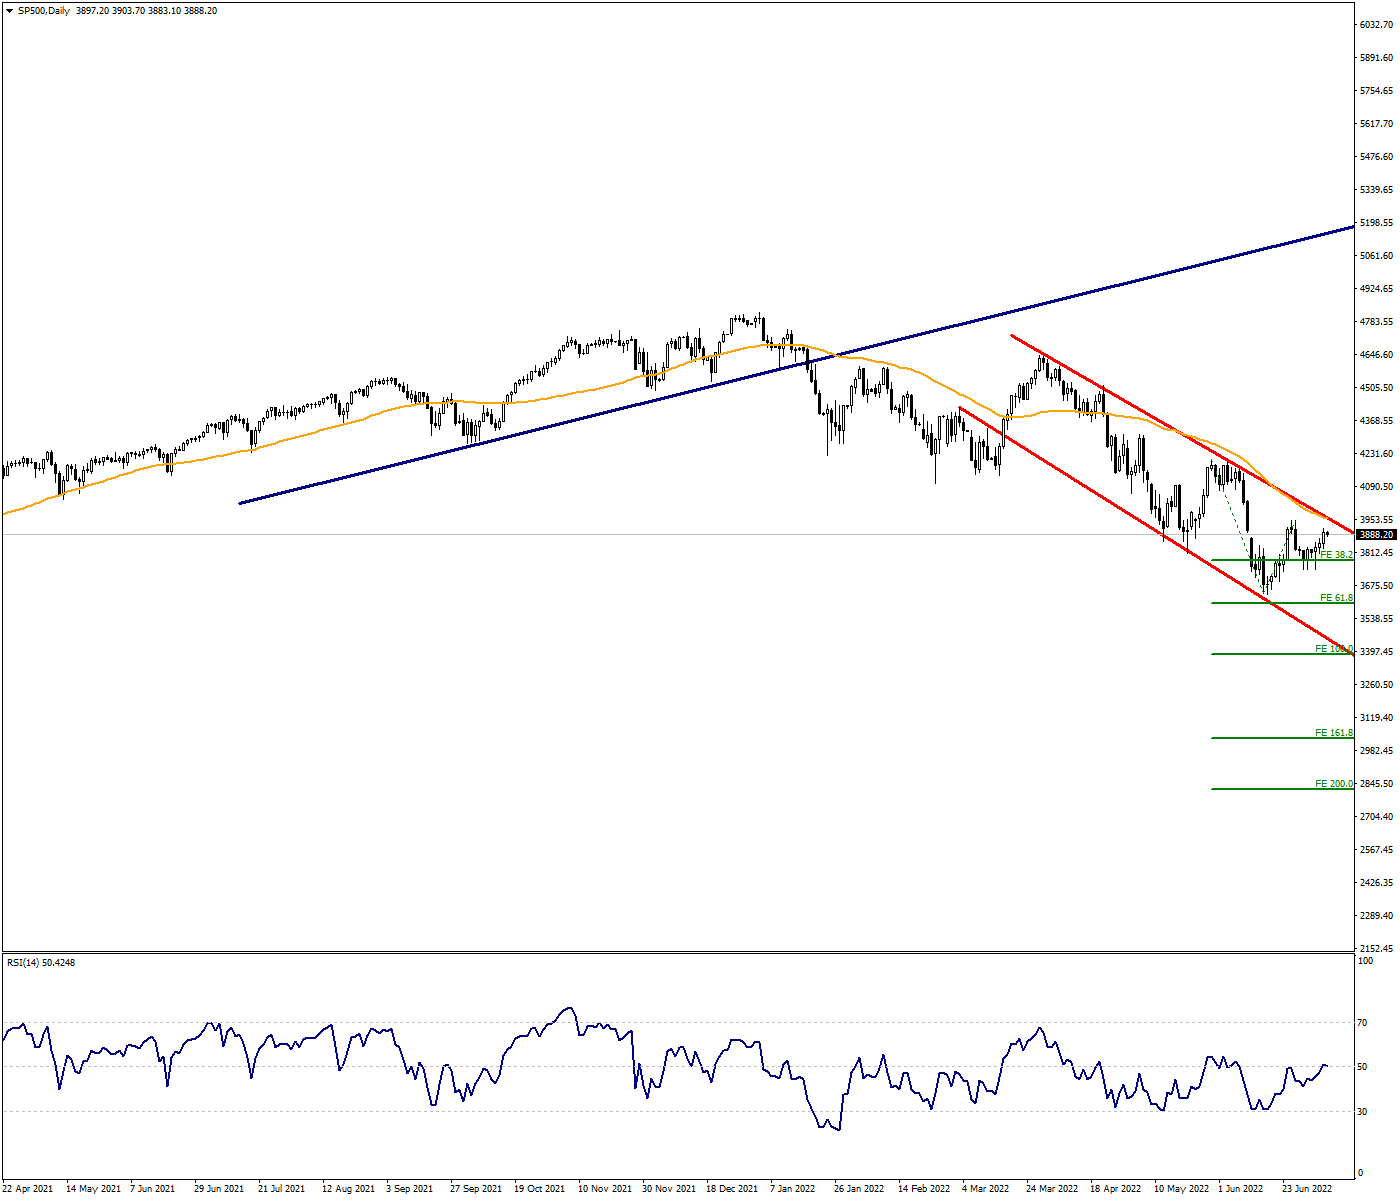 50 MA Will Be Decisive in SP500